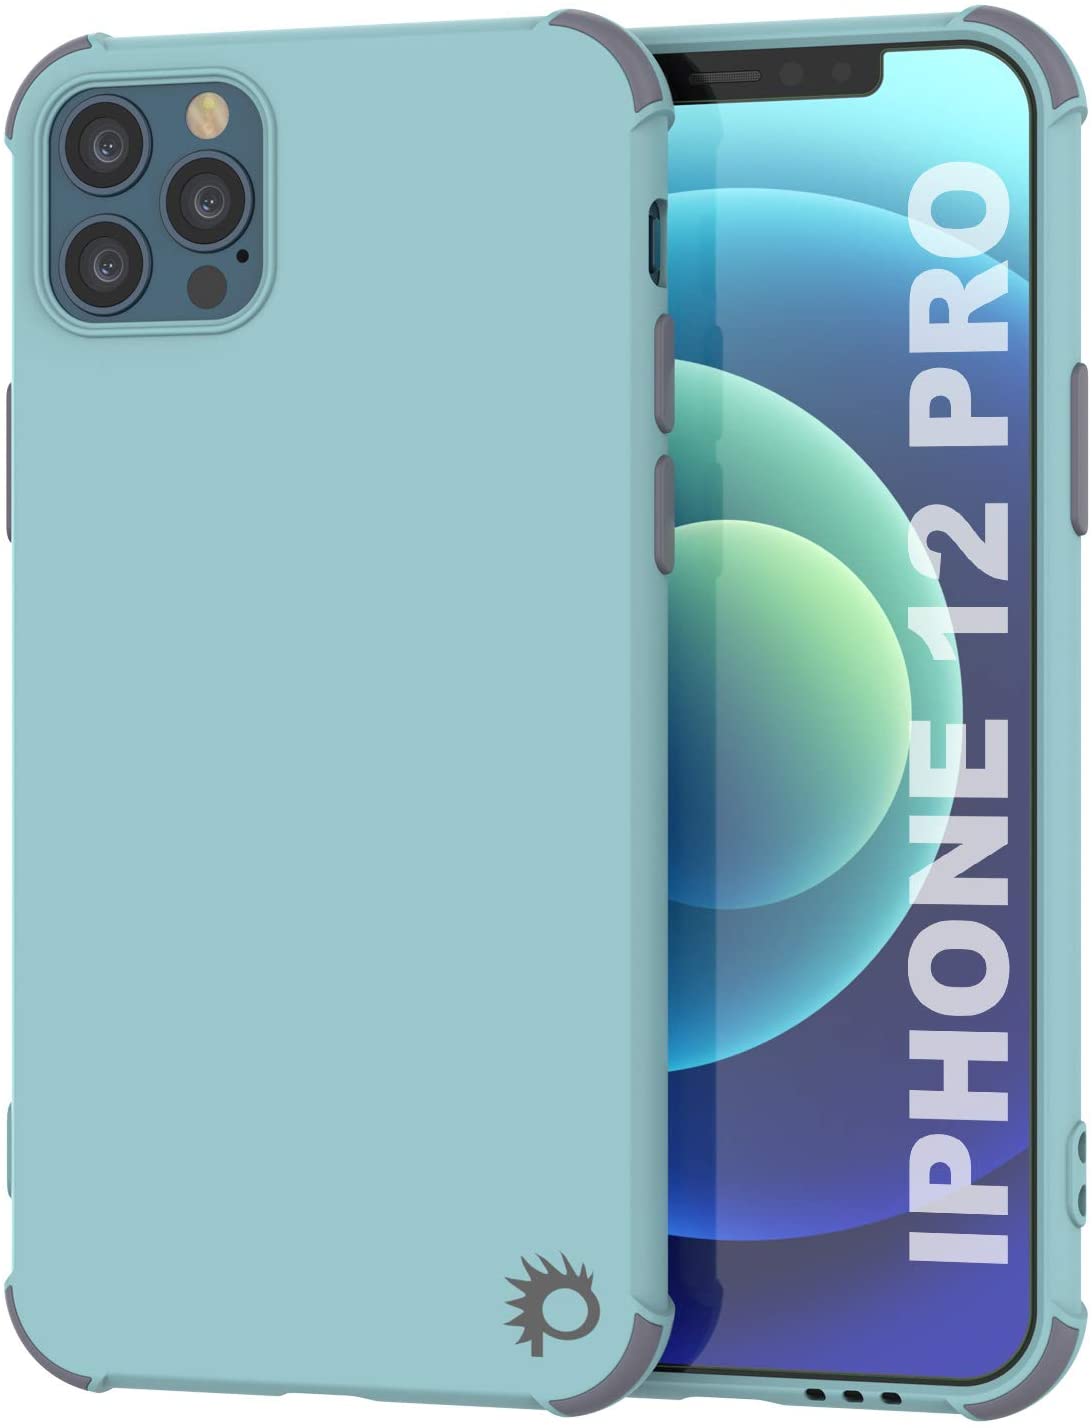 Punkcase Protective & Lightweight TPU Case [Sunshine Series] for iPhone 12 Pro [Teal] (Color in image: Teal)